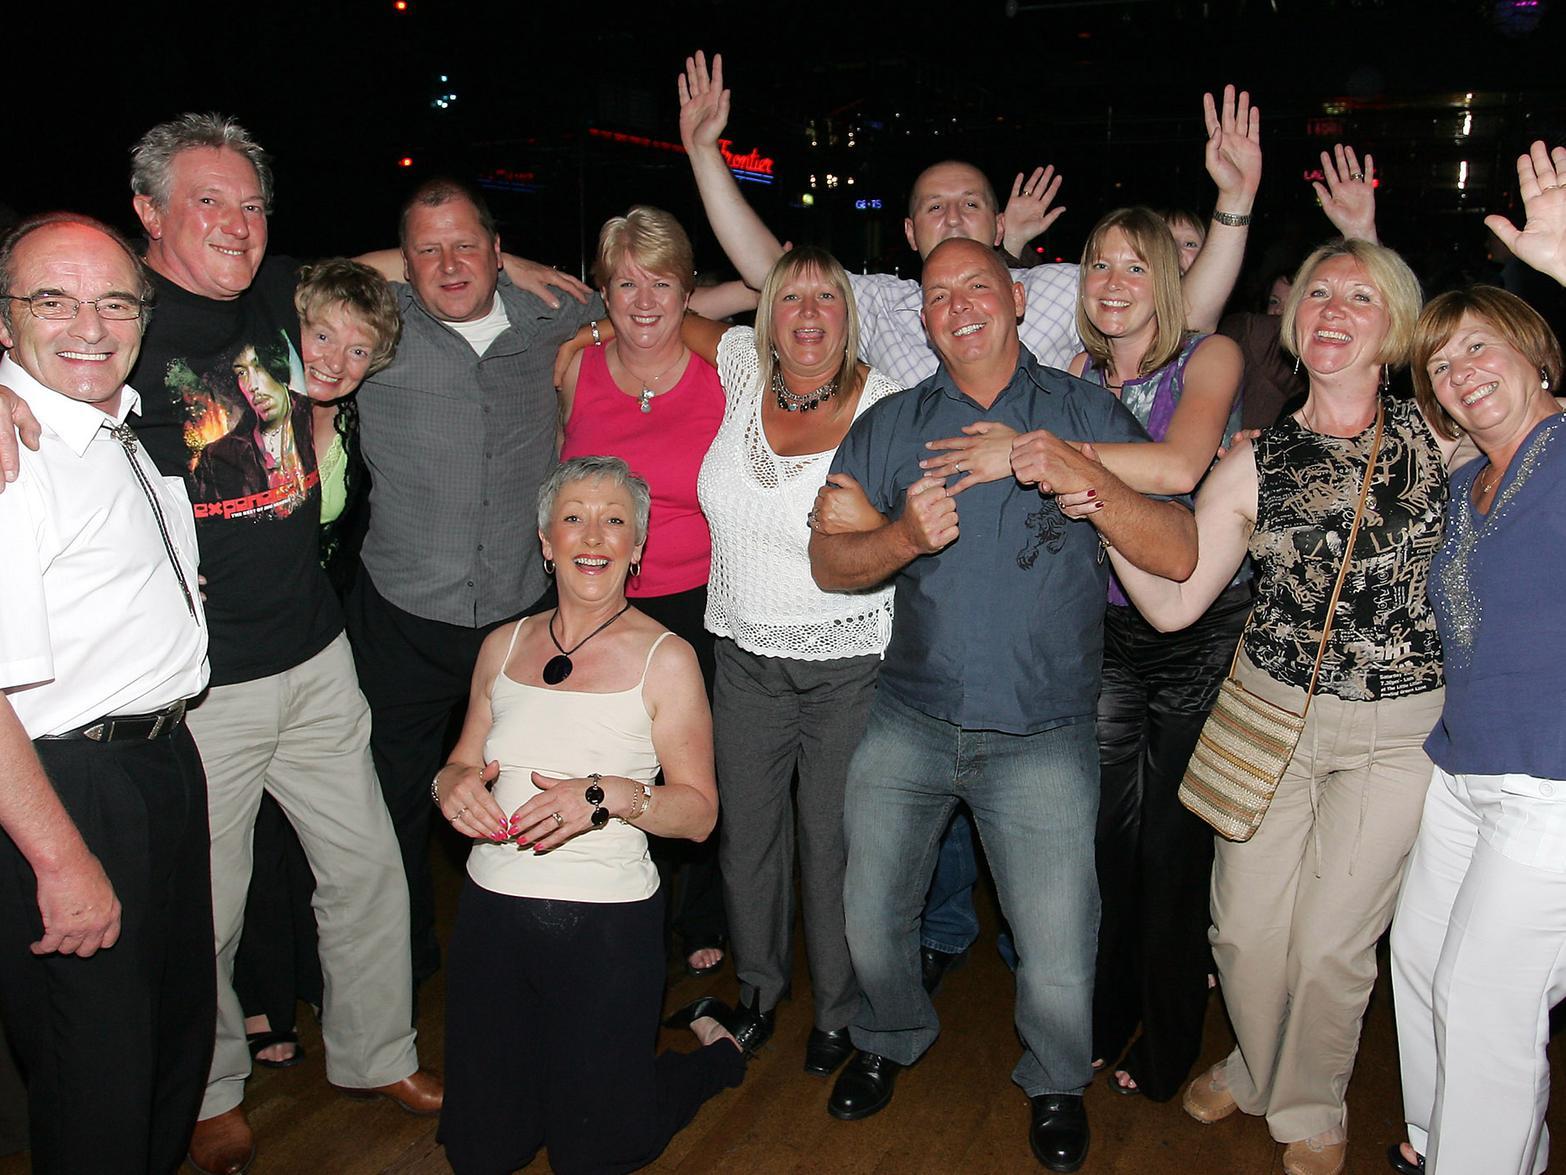 Staff and friends from The Needles Pub in Morley enjoy a night out at The Frontier.